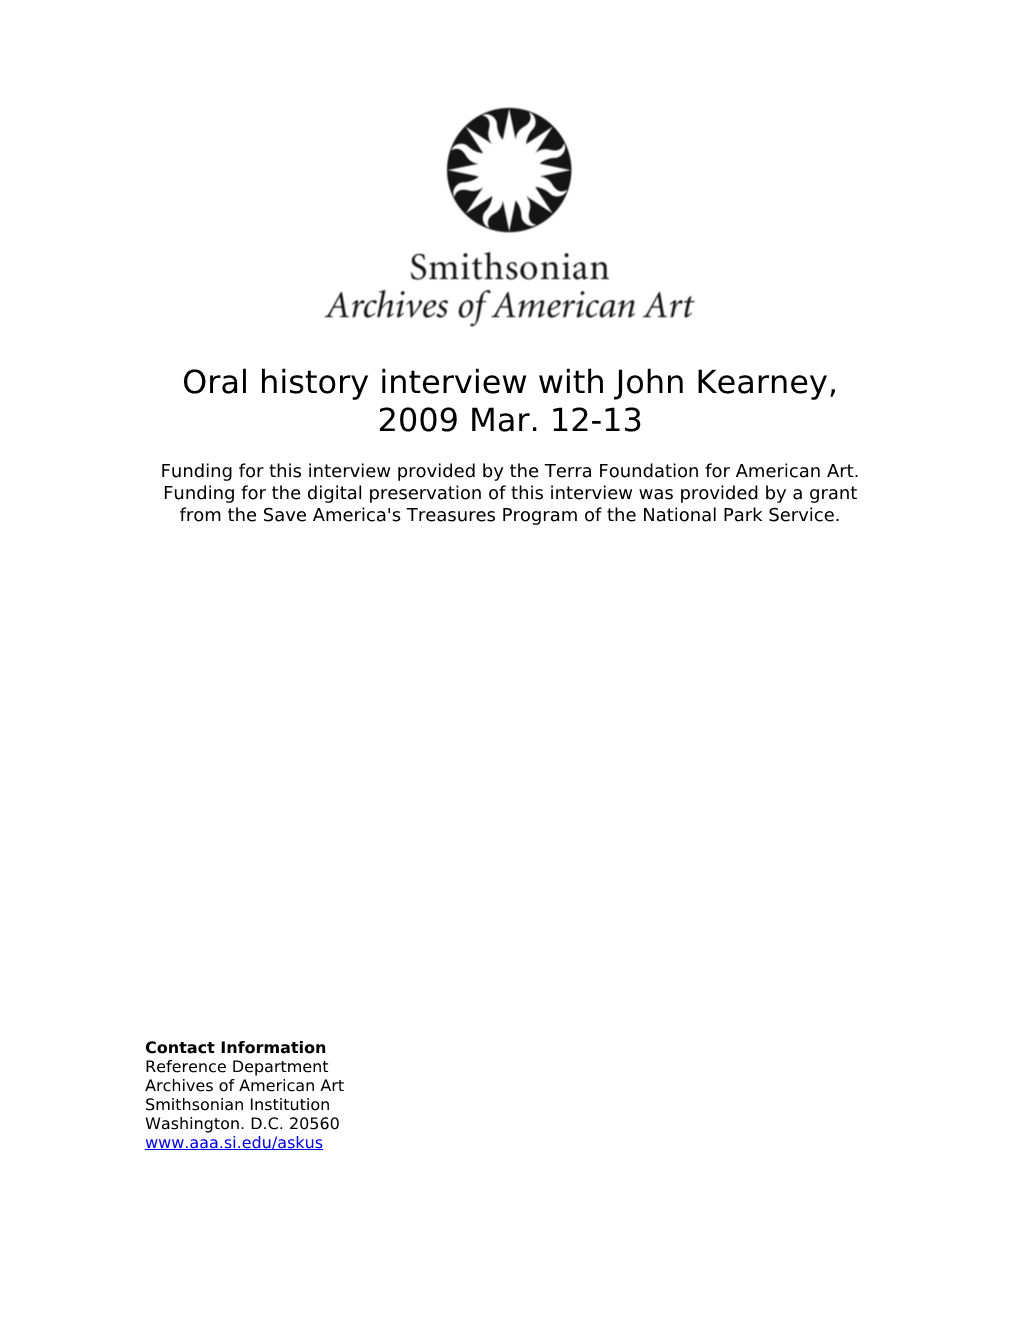 Oral History Interview with John Kearney, 2009 Mar. 12-13